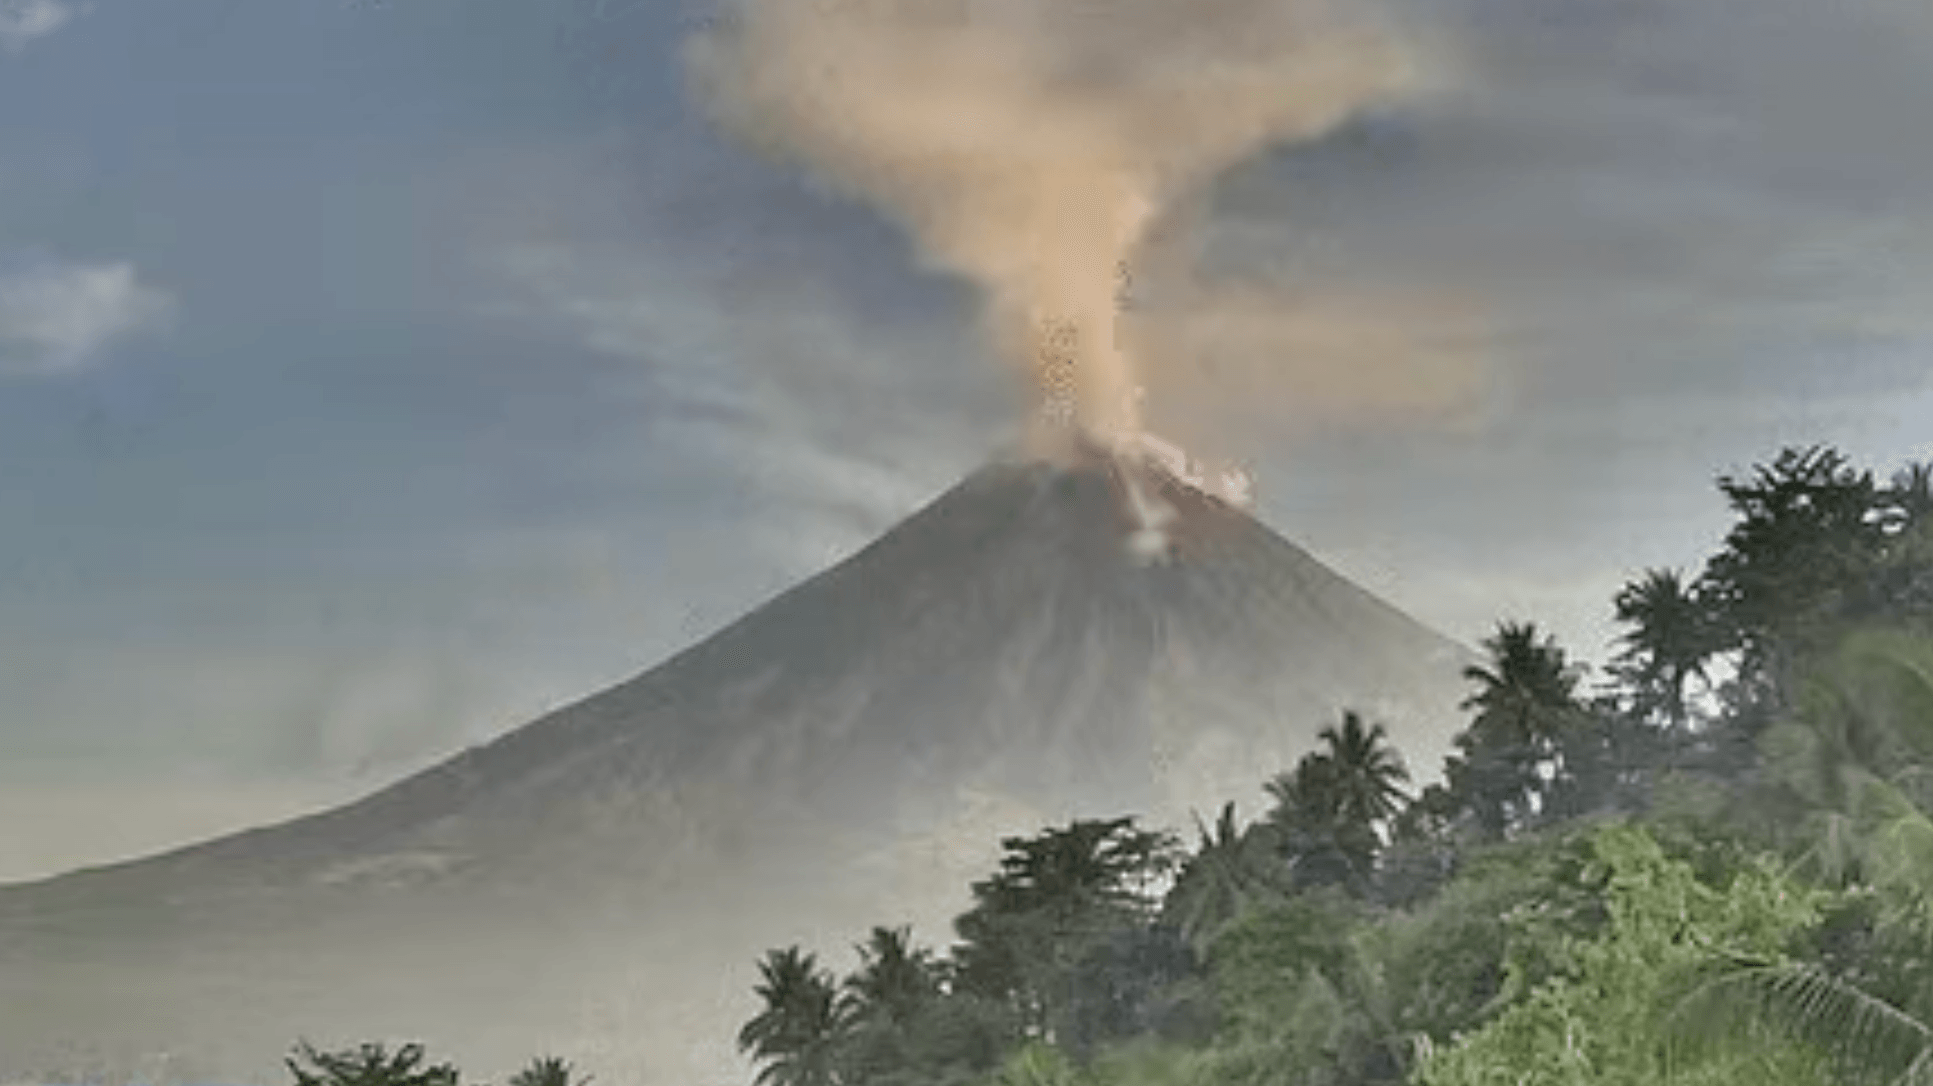 Albay’s Mayon Volcano placed under Alert Level 3